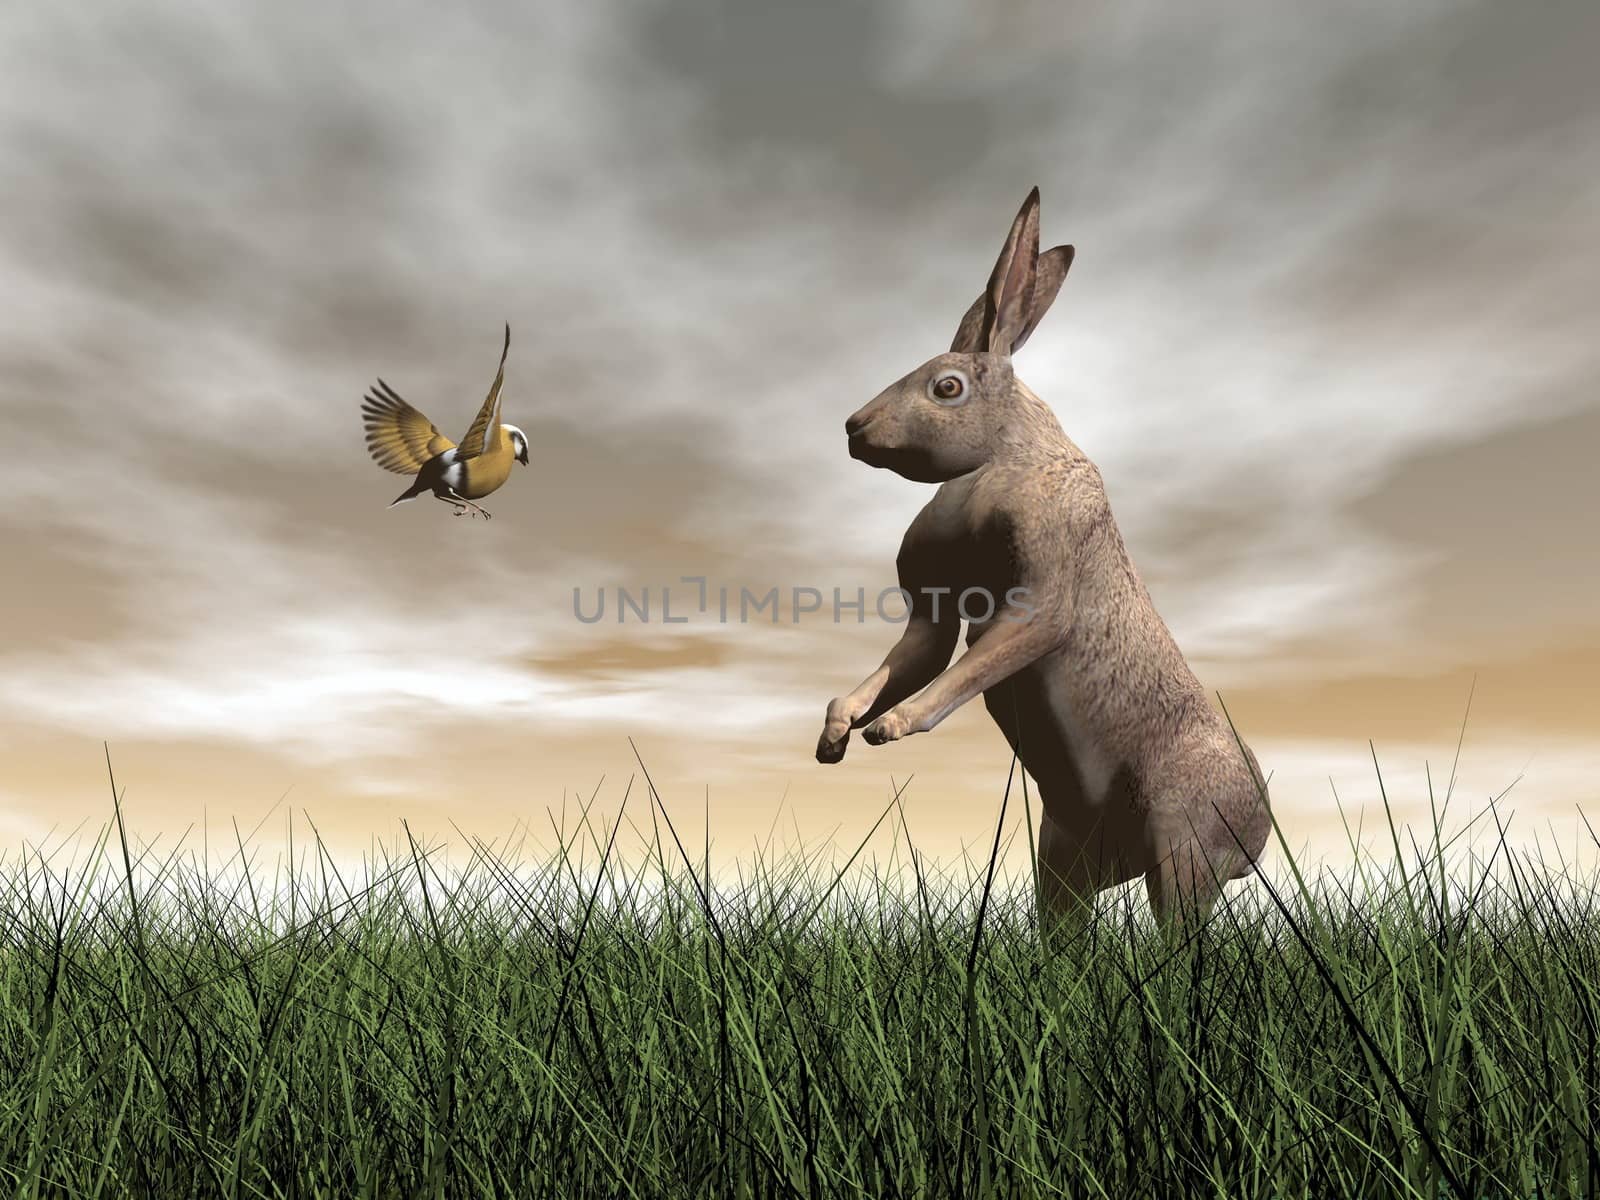 One hare talking to a bird on the grass by brown sunset